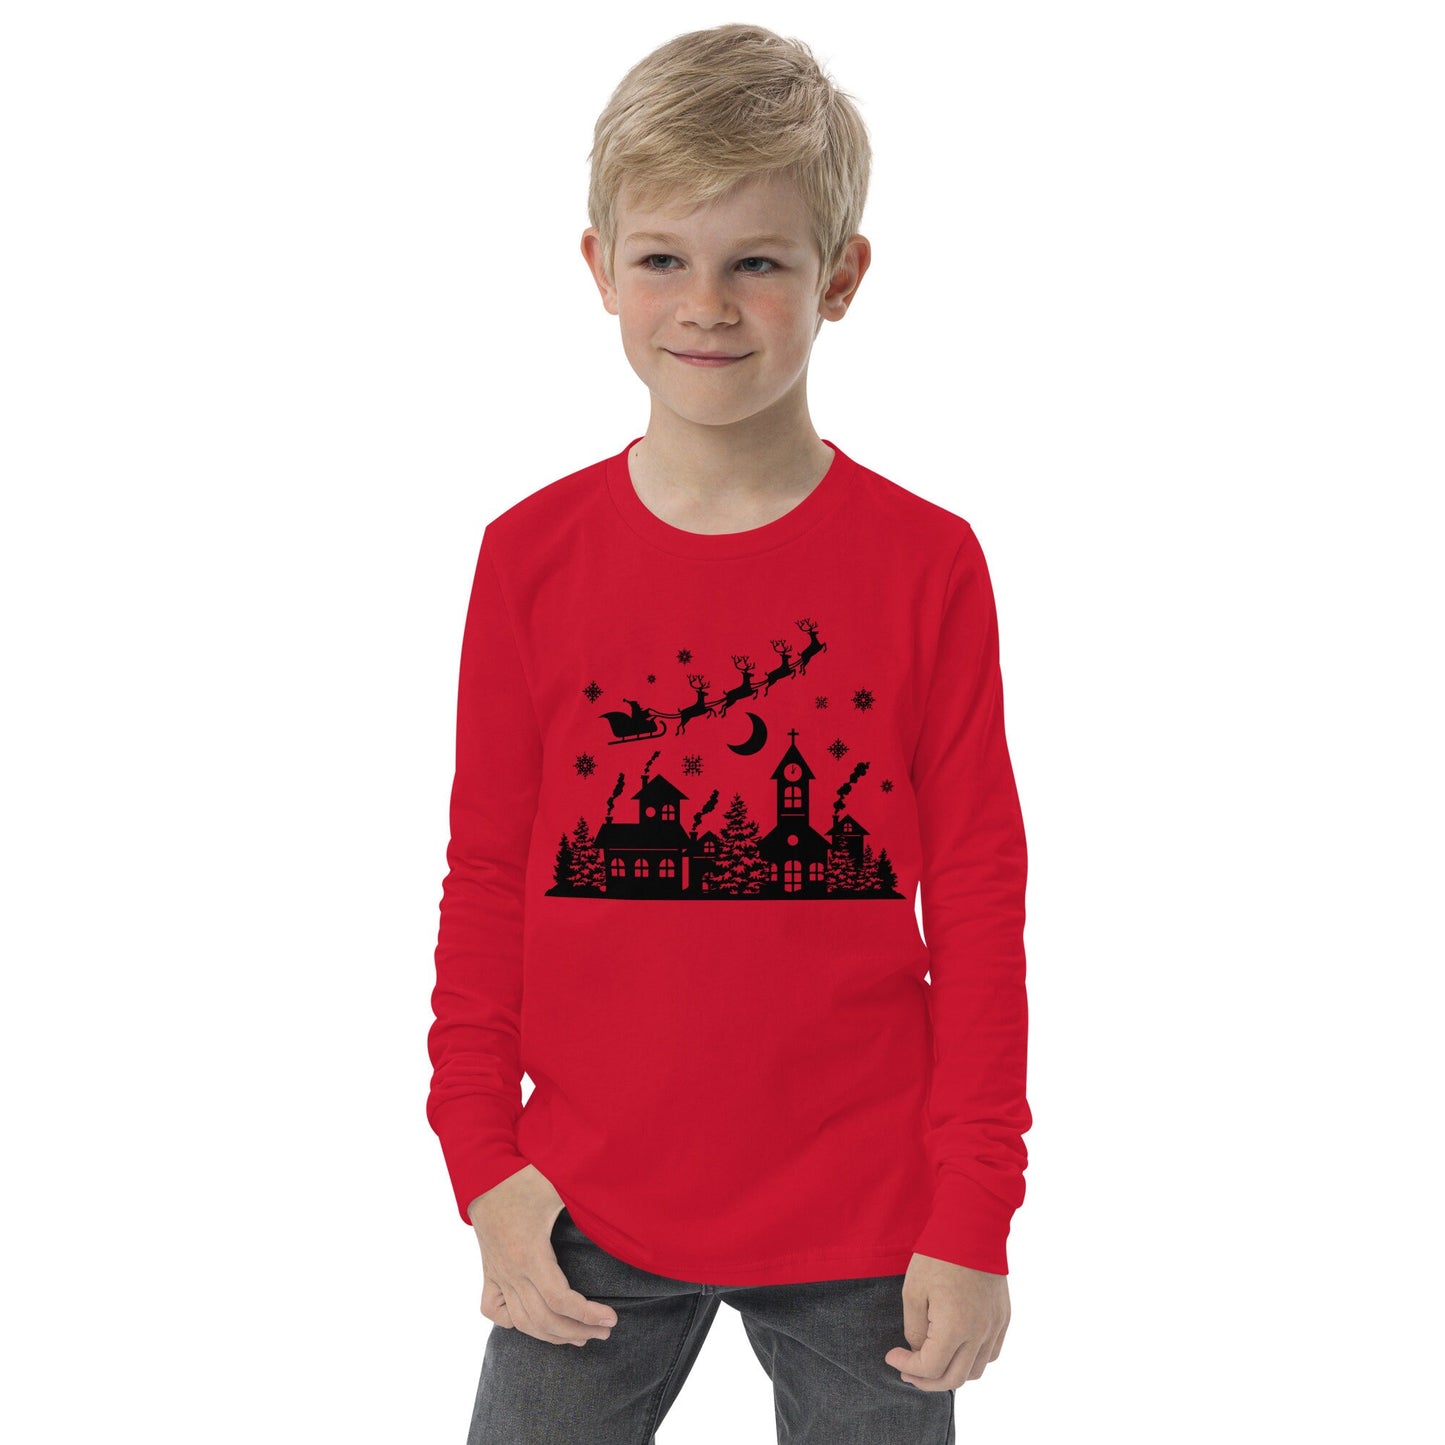 Old Town Silhouette - Santa Riding over in Sleigh with Reindeer - Youth long sleeve tee